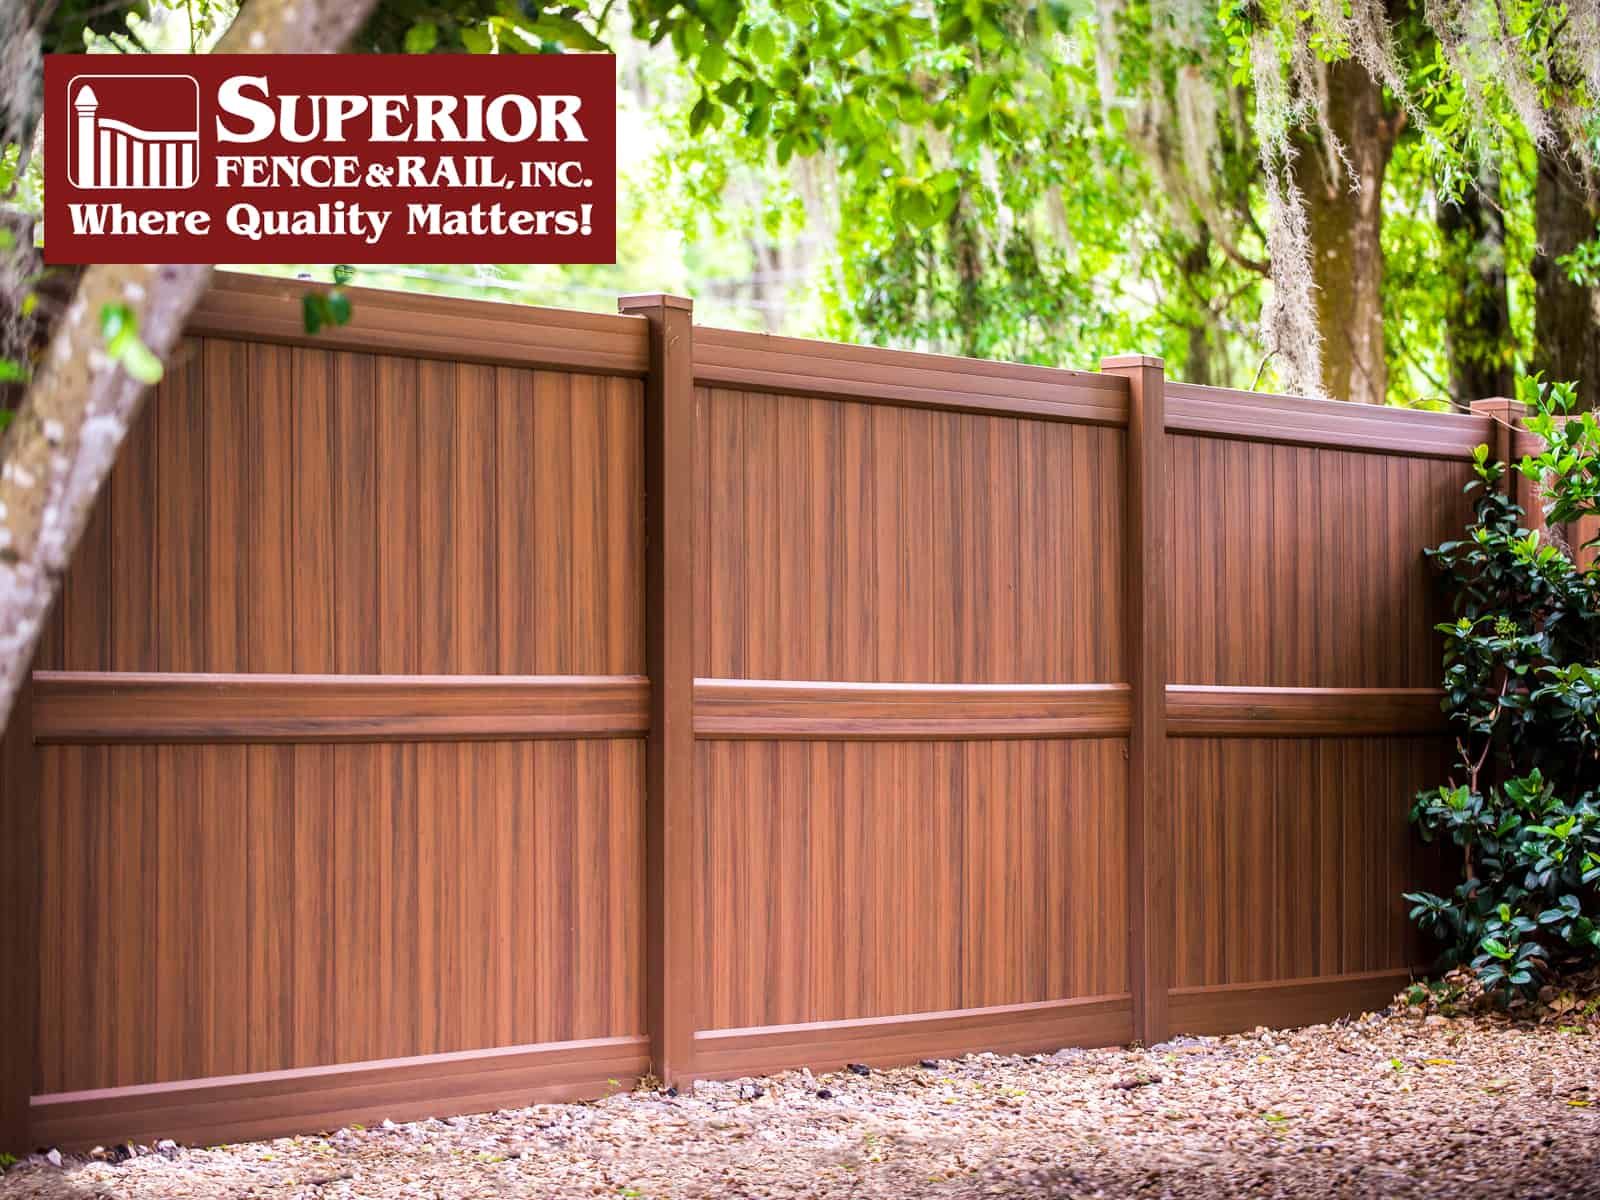 North Myrtle Beach Fence Company Contractor